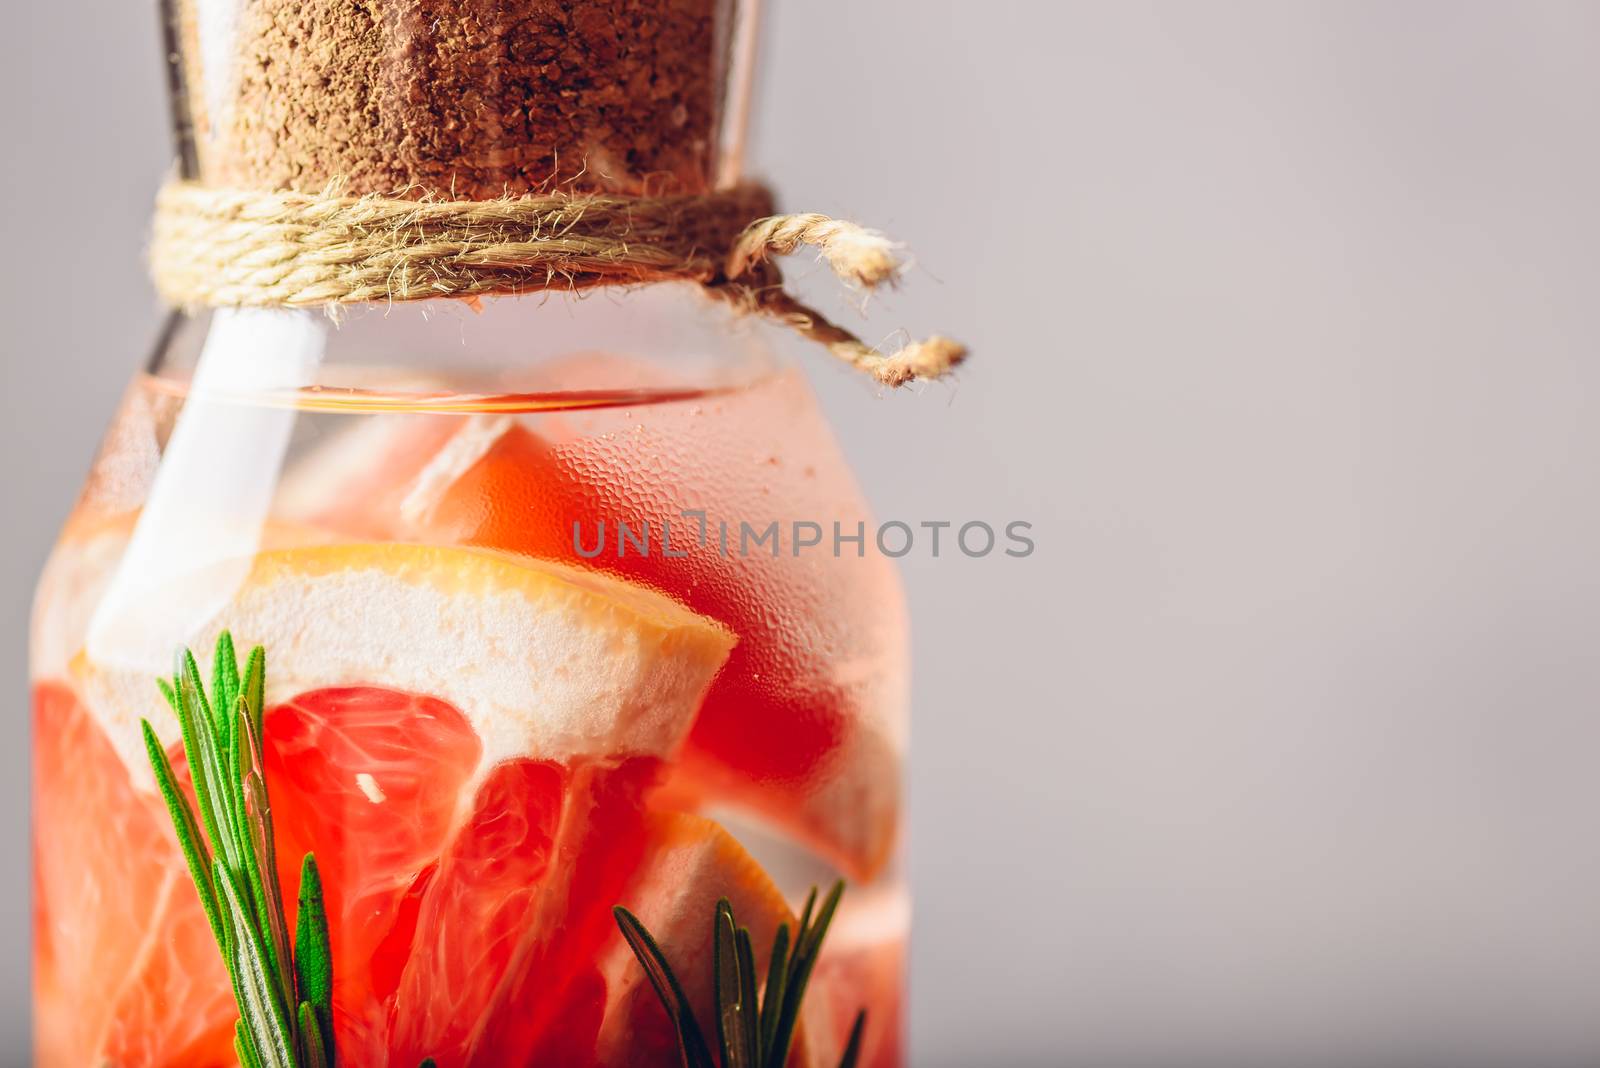 Part of Bottle with Grapefruit and Rosemary infused Water. Close up. Copy Space on the Right.